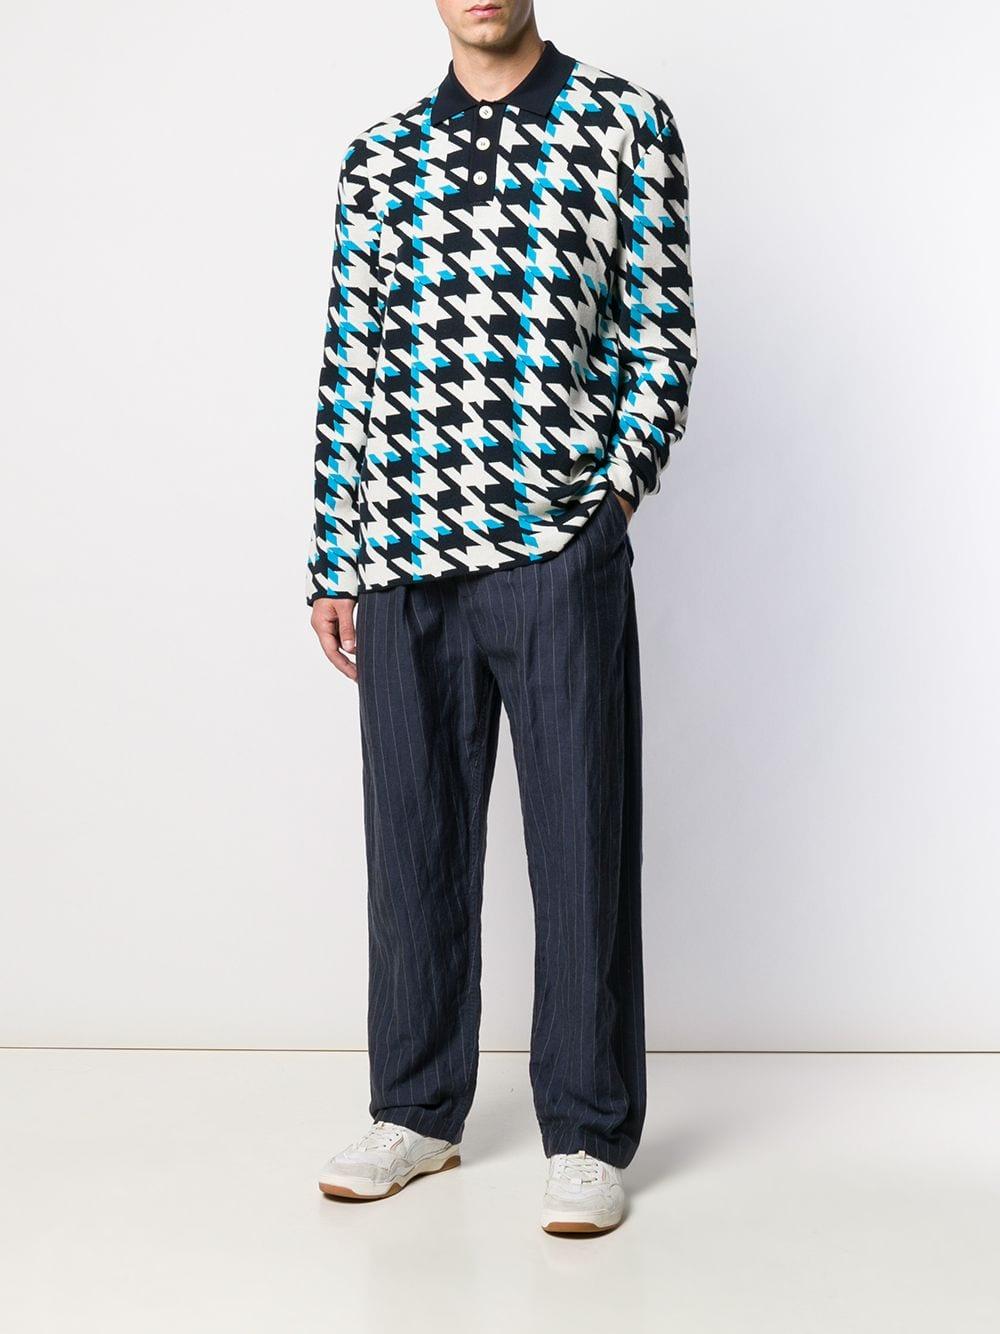 Sunnei Cotton Houndstooth Polo Shirt in Blue for Men - Lyst